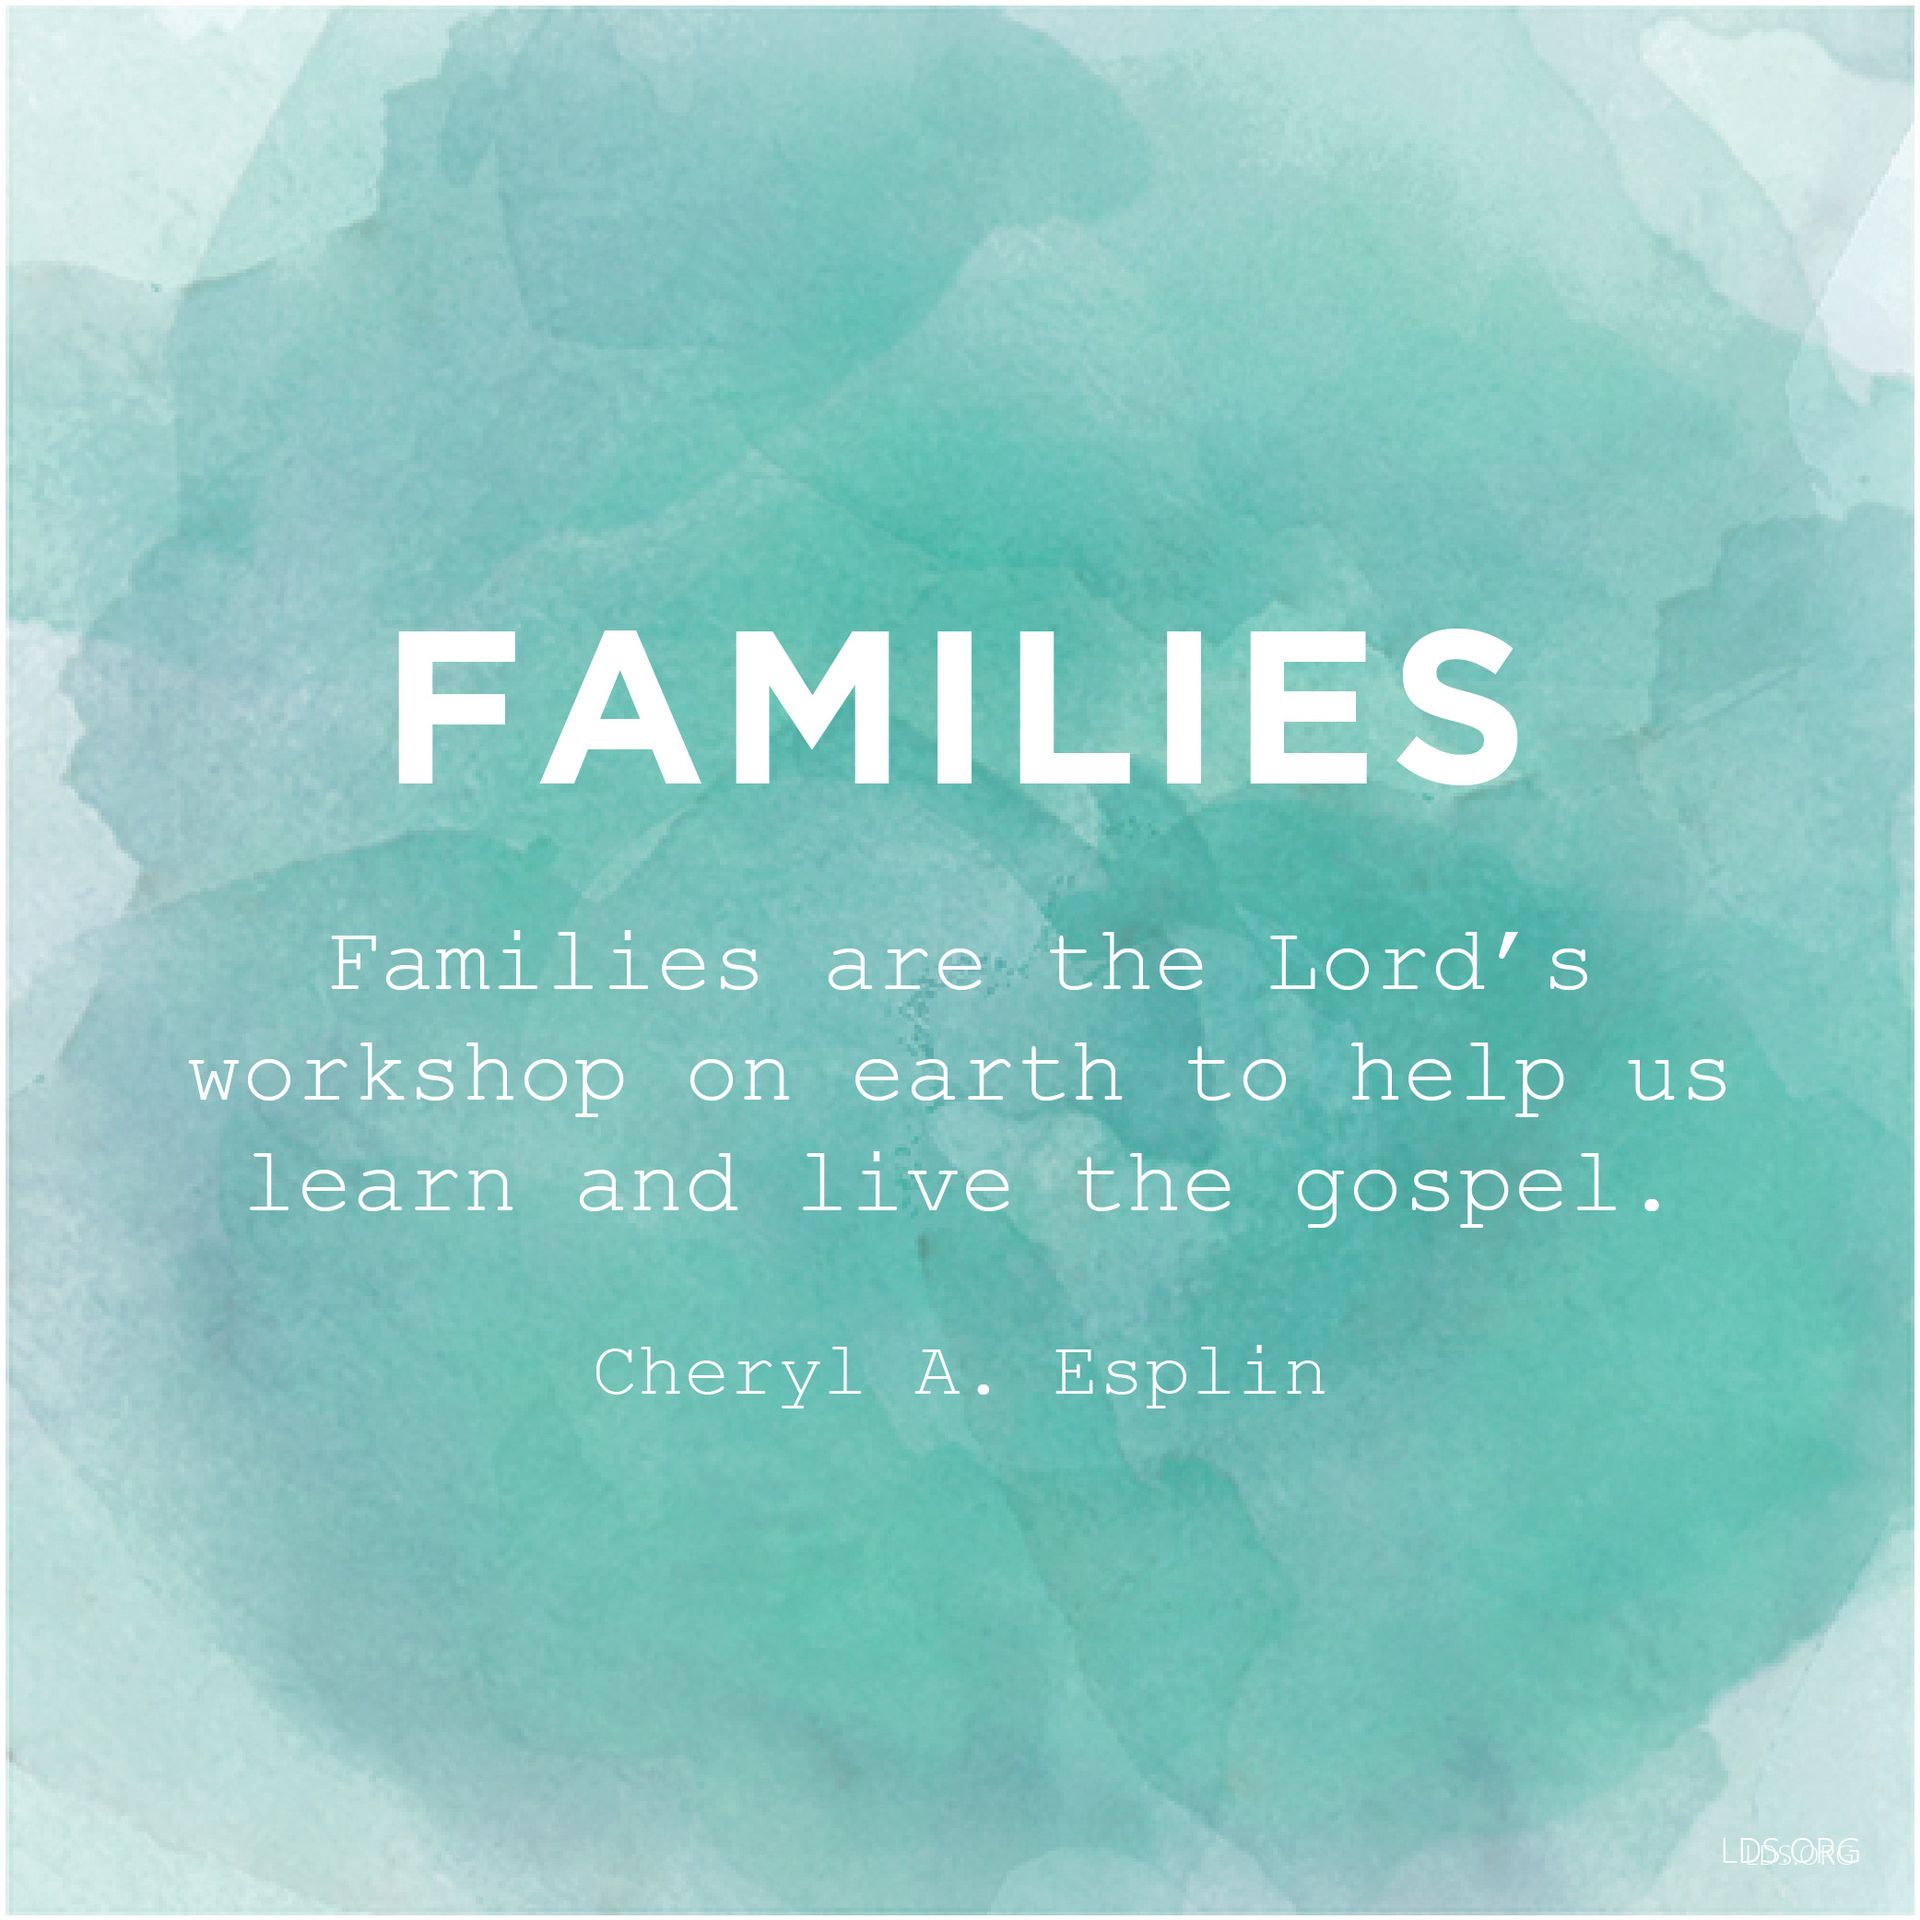 “Families are the Lord’s workshop on earth to help us learn and live the gospel.”—Sister Cheryl A. Esplin, “Filling Our Homes with Light and Truth”